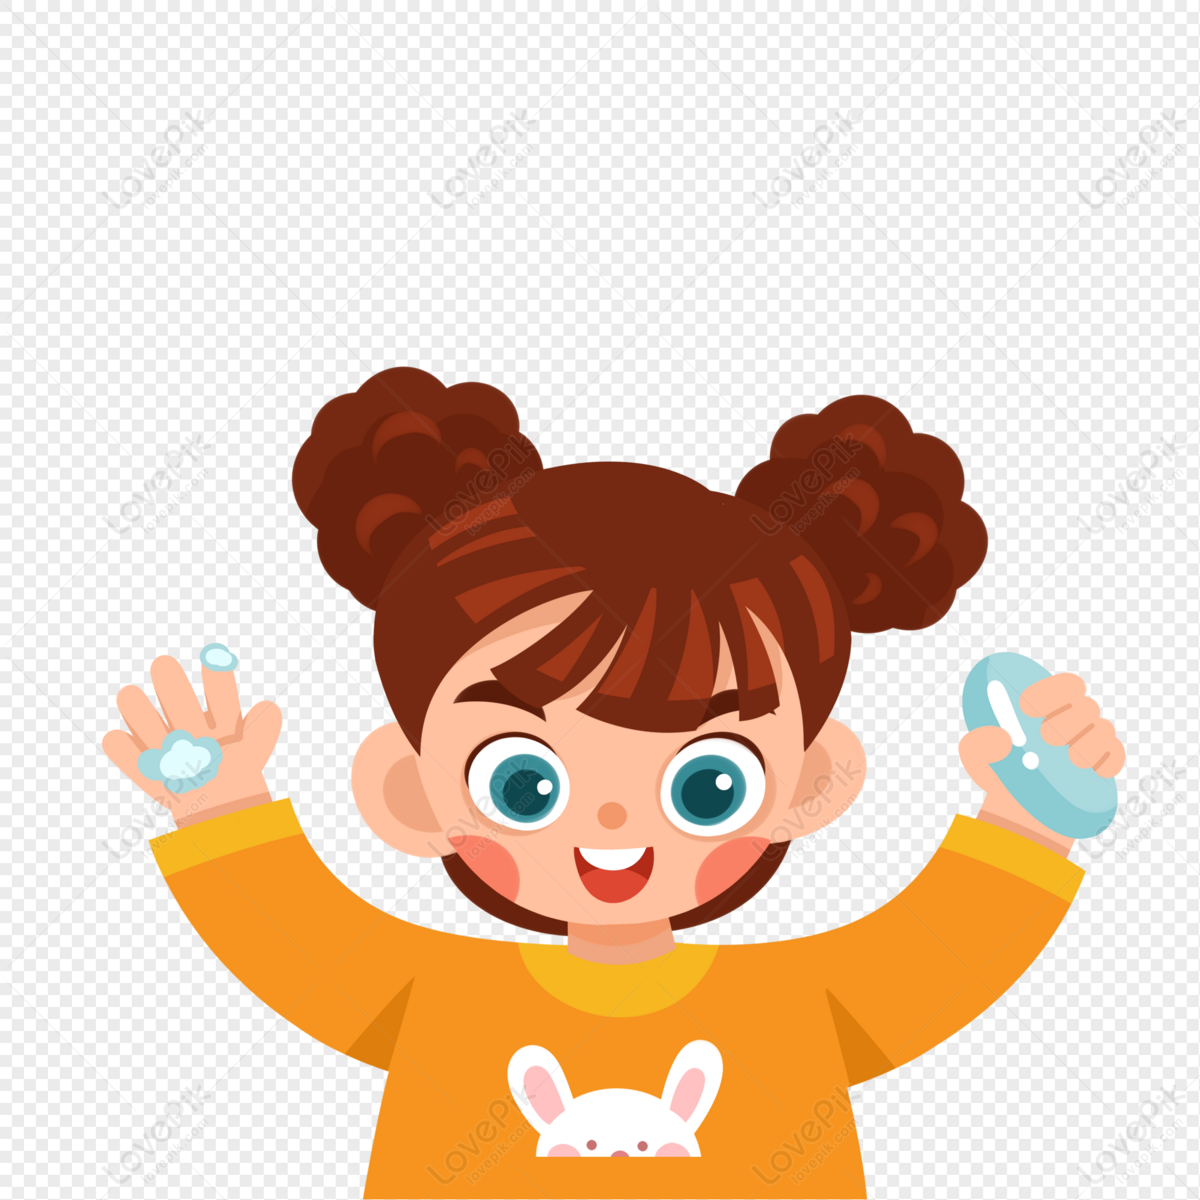 Girl Washing Hands Frequently PNG Picture And Clipart Image For Free  Download - Lovepik | 401691995